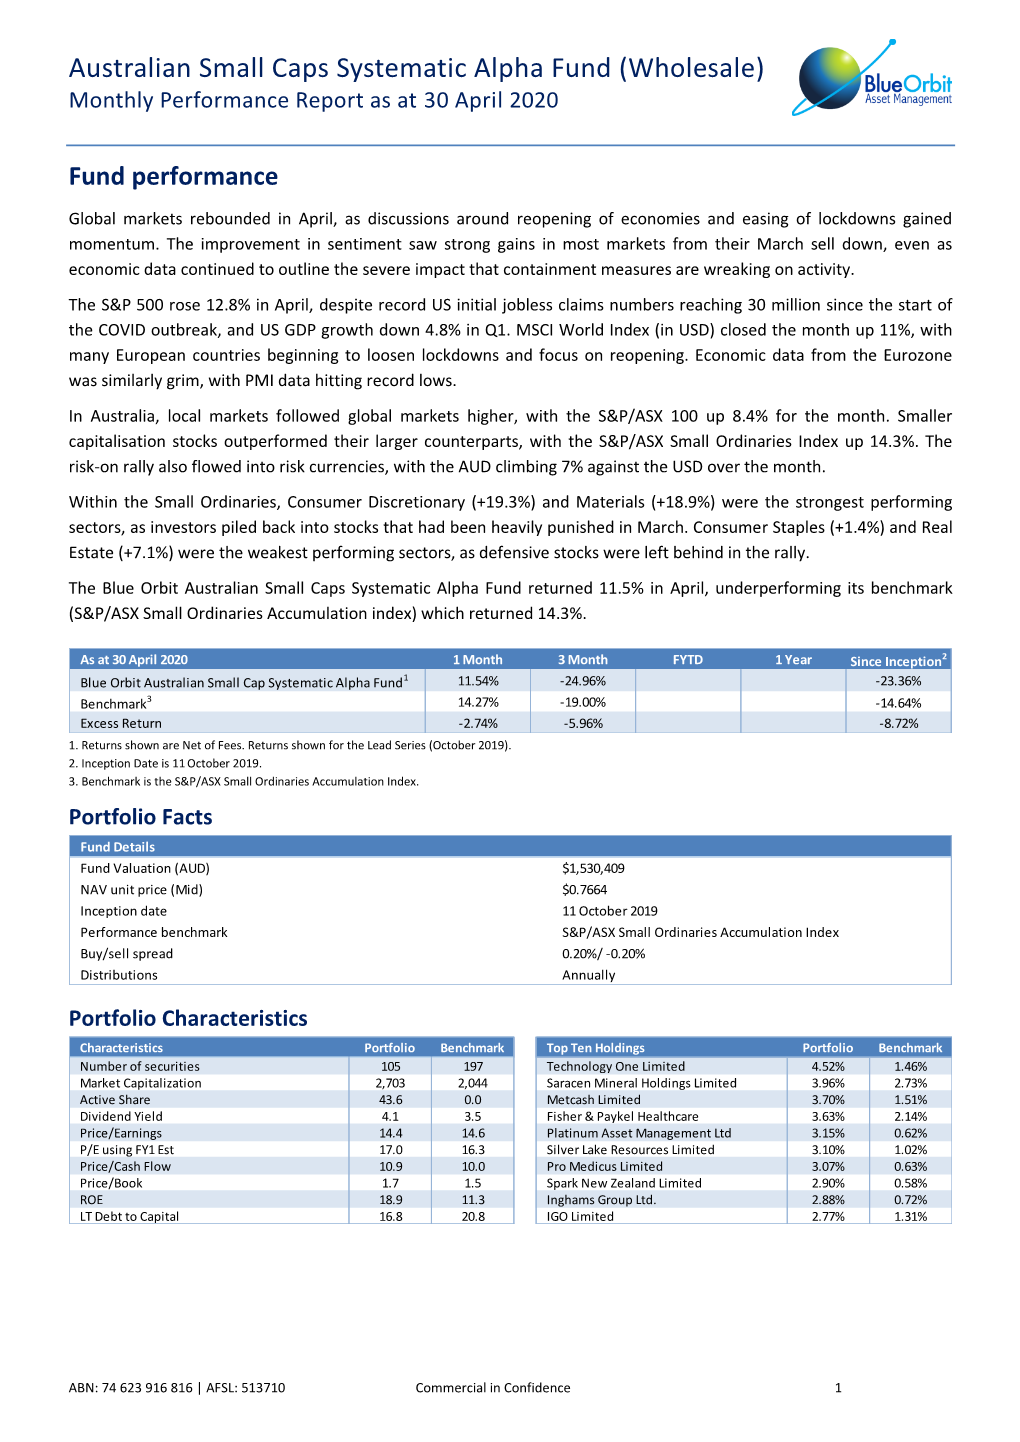 Australian Small Caps Systematic Alpha Fund (Wholesale) Monthly Performance Report As at 30 April 2020